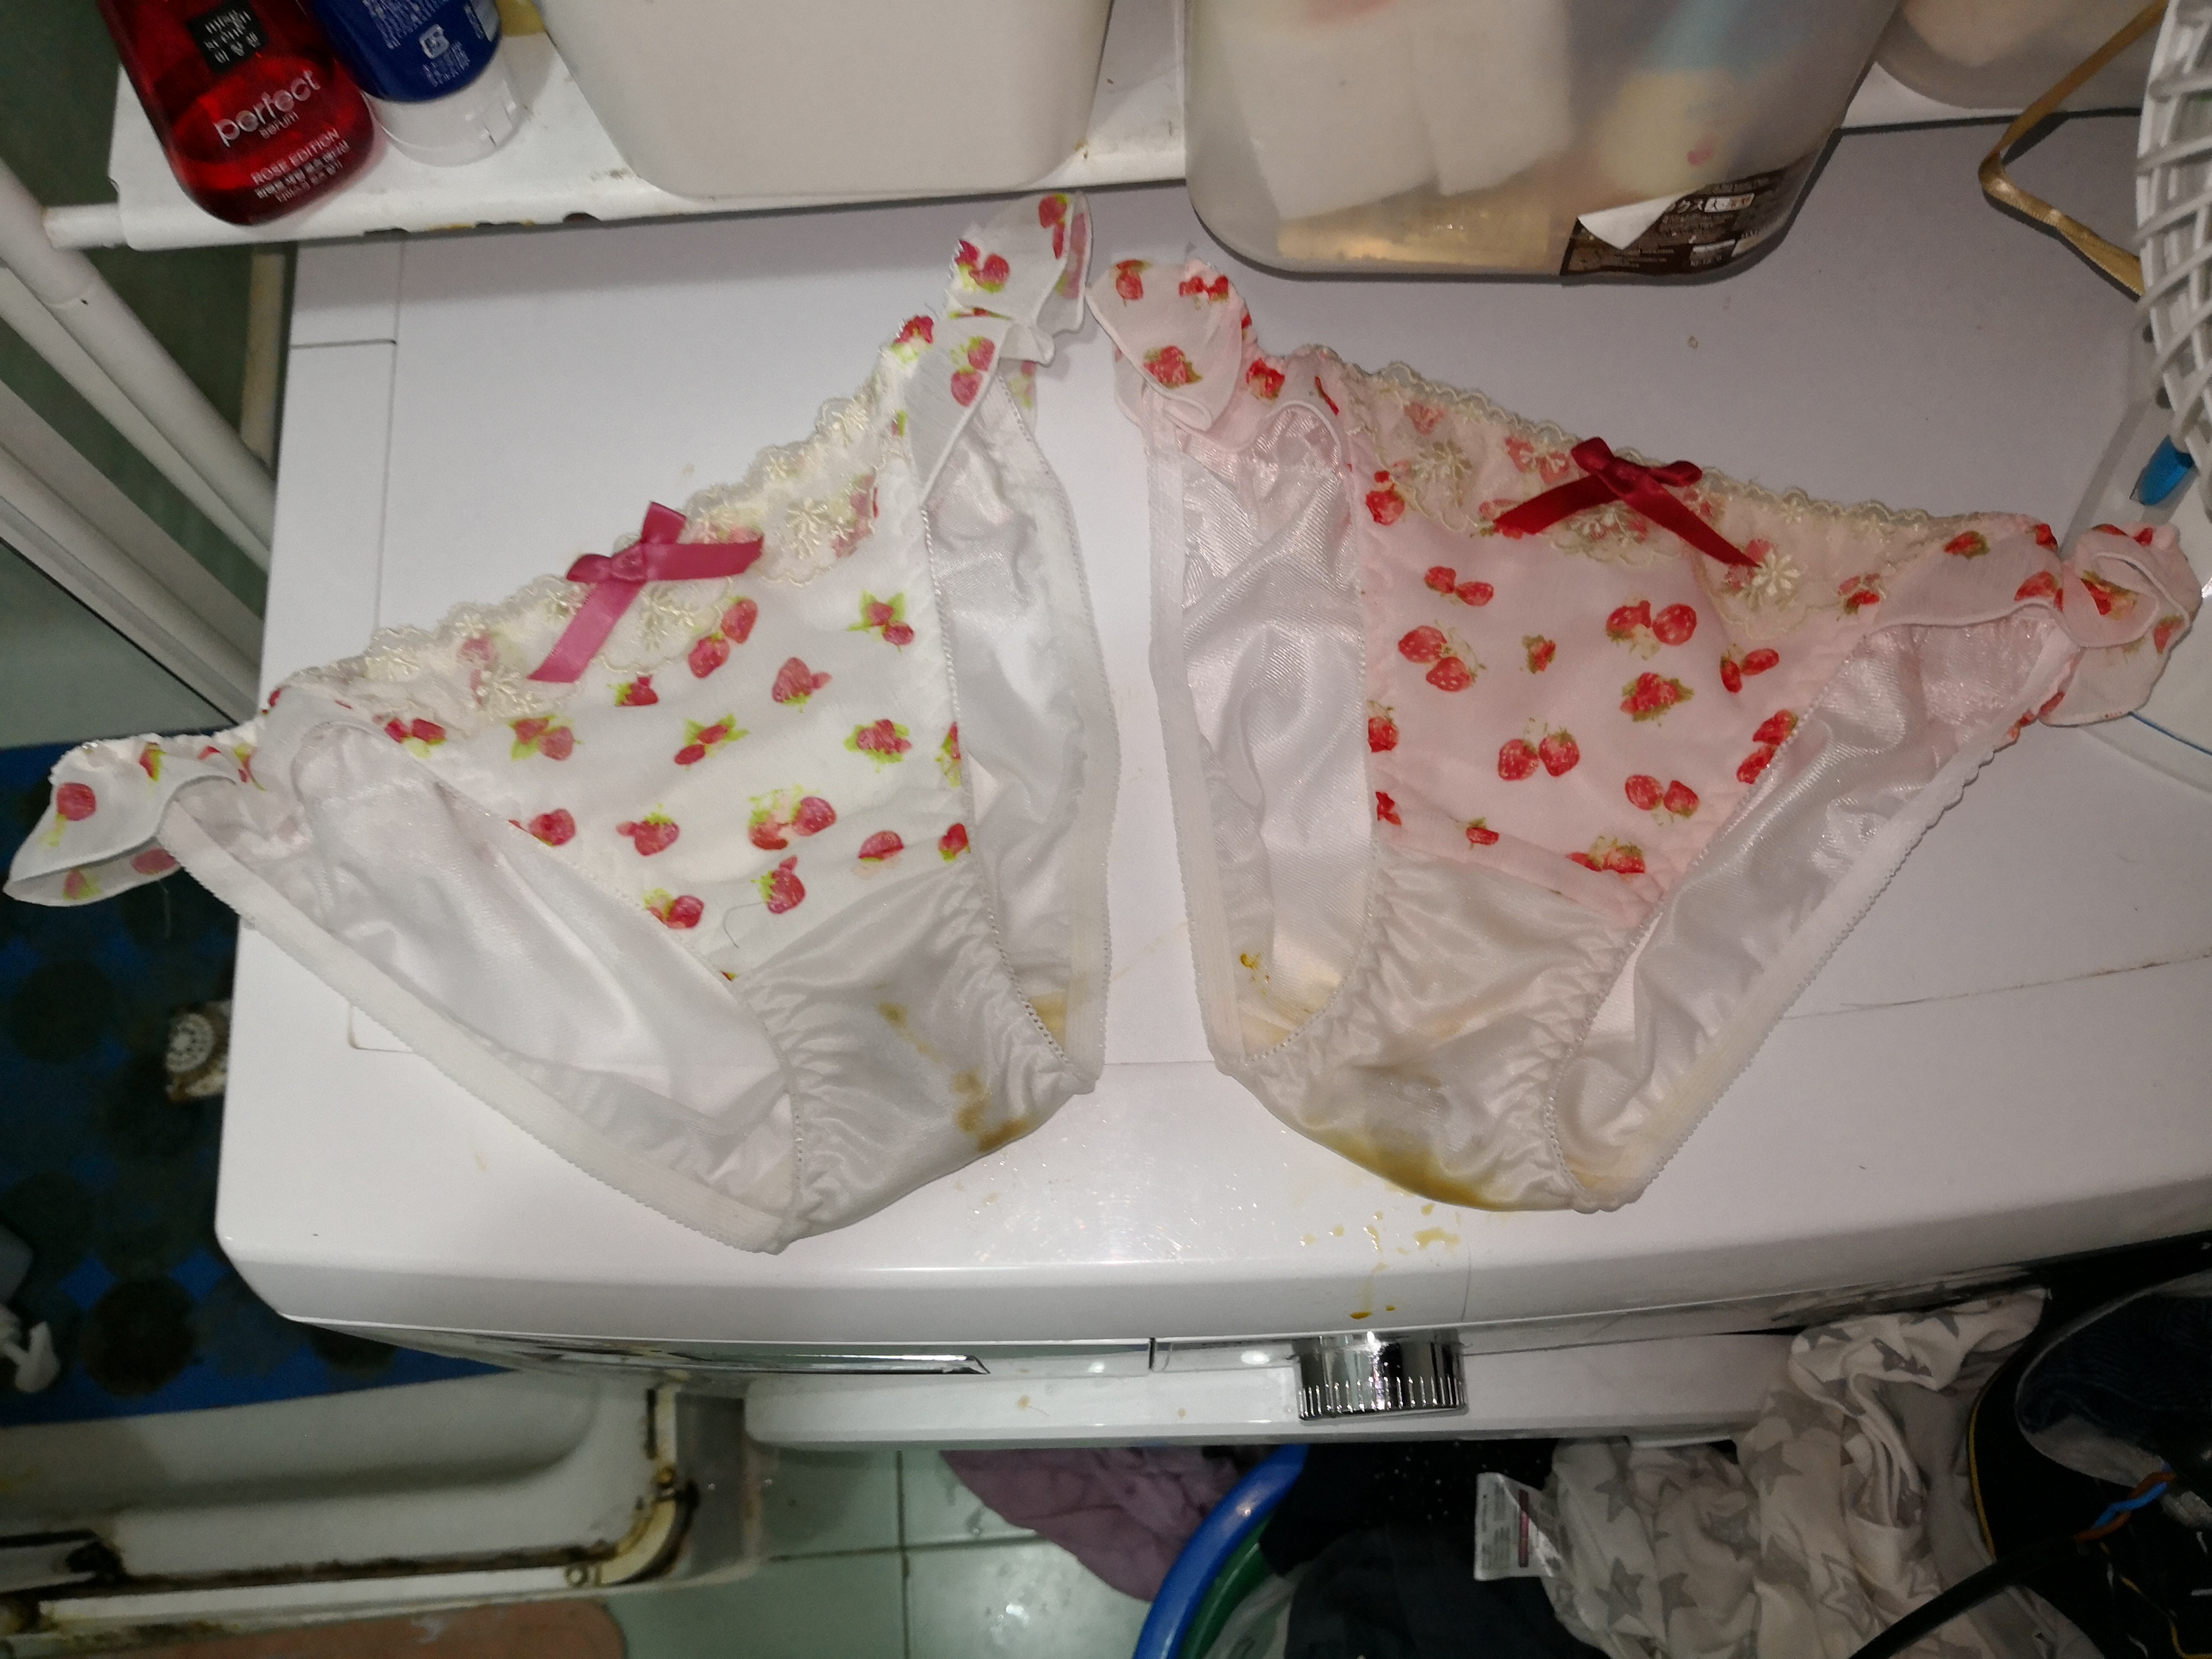 Two lovely Strawberry panties with a big shit insdie and it was extruding